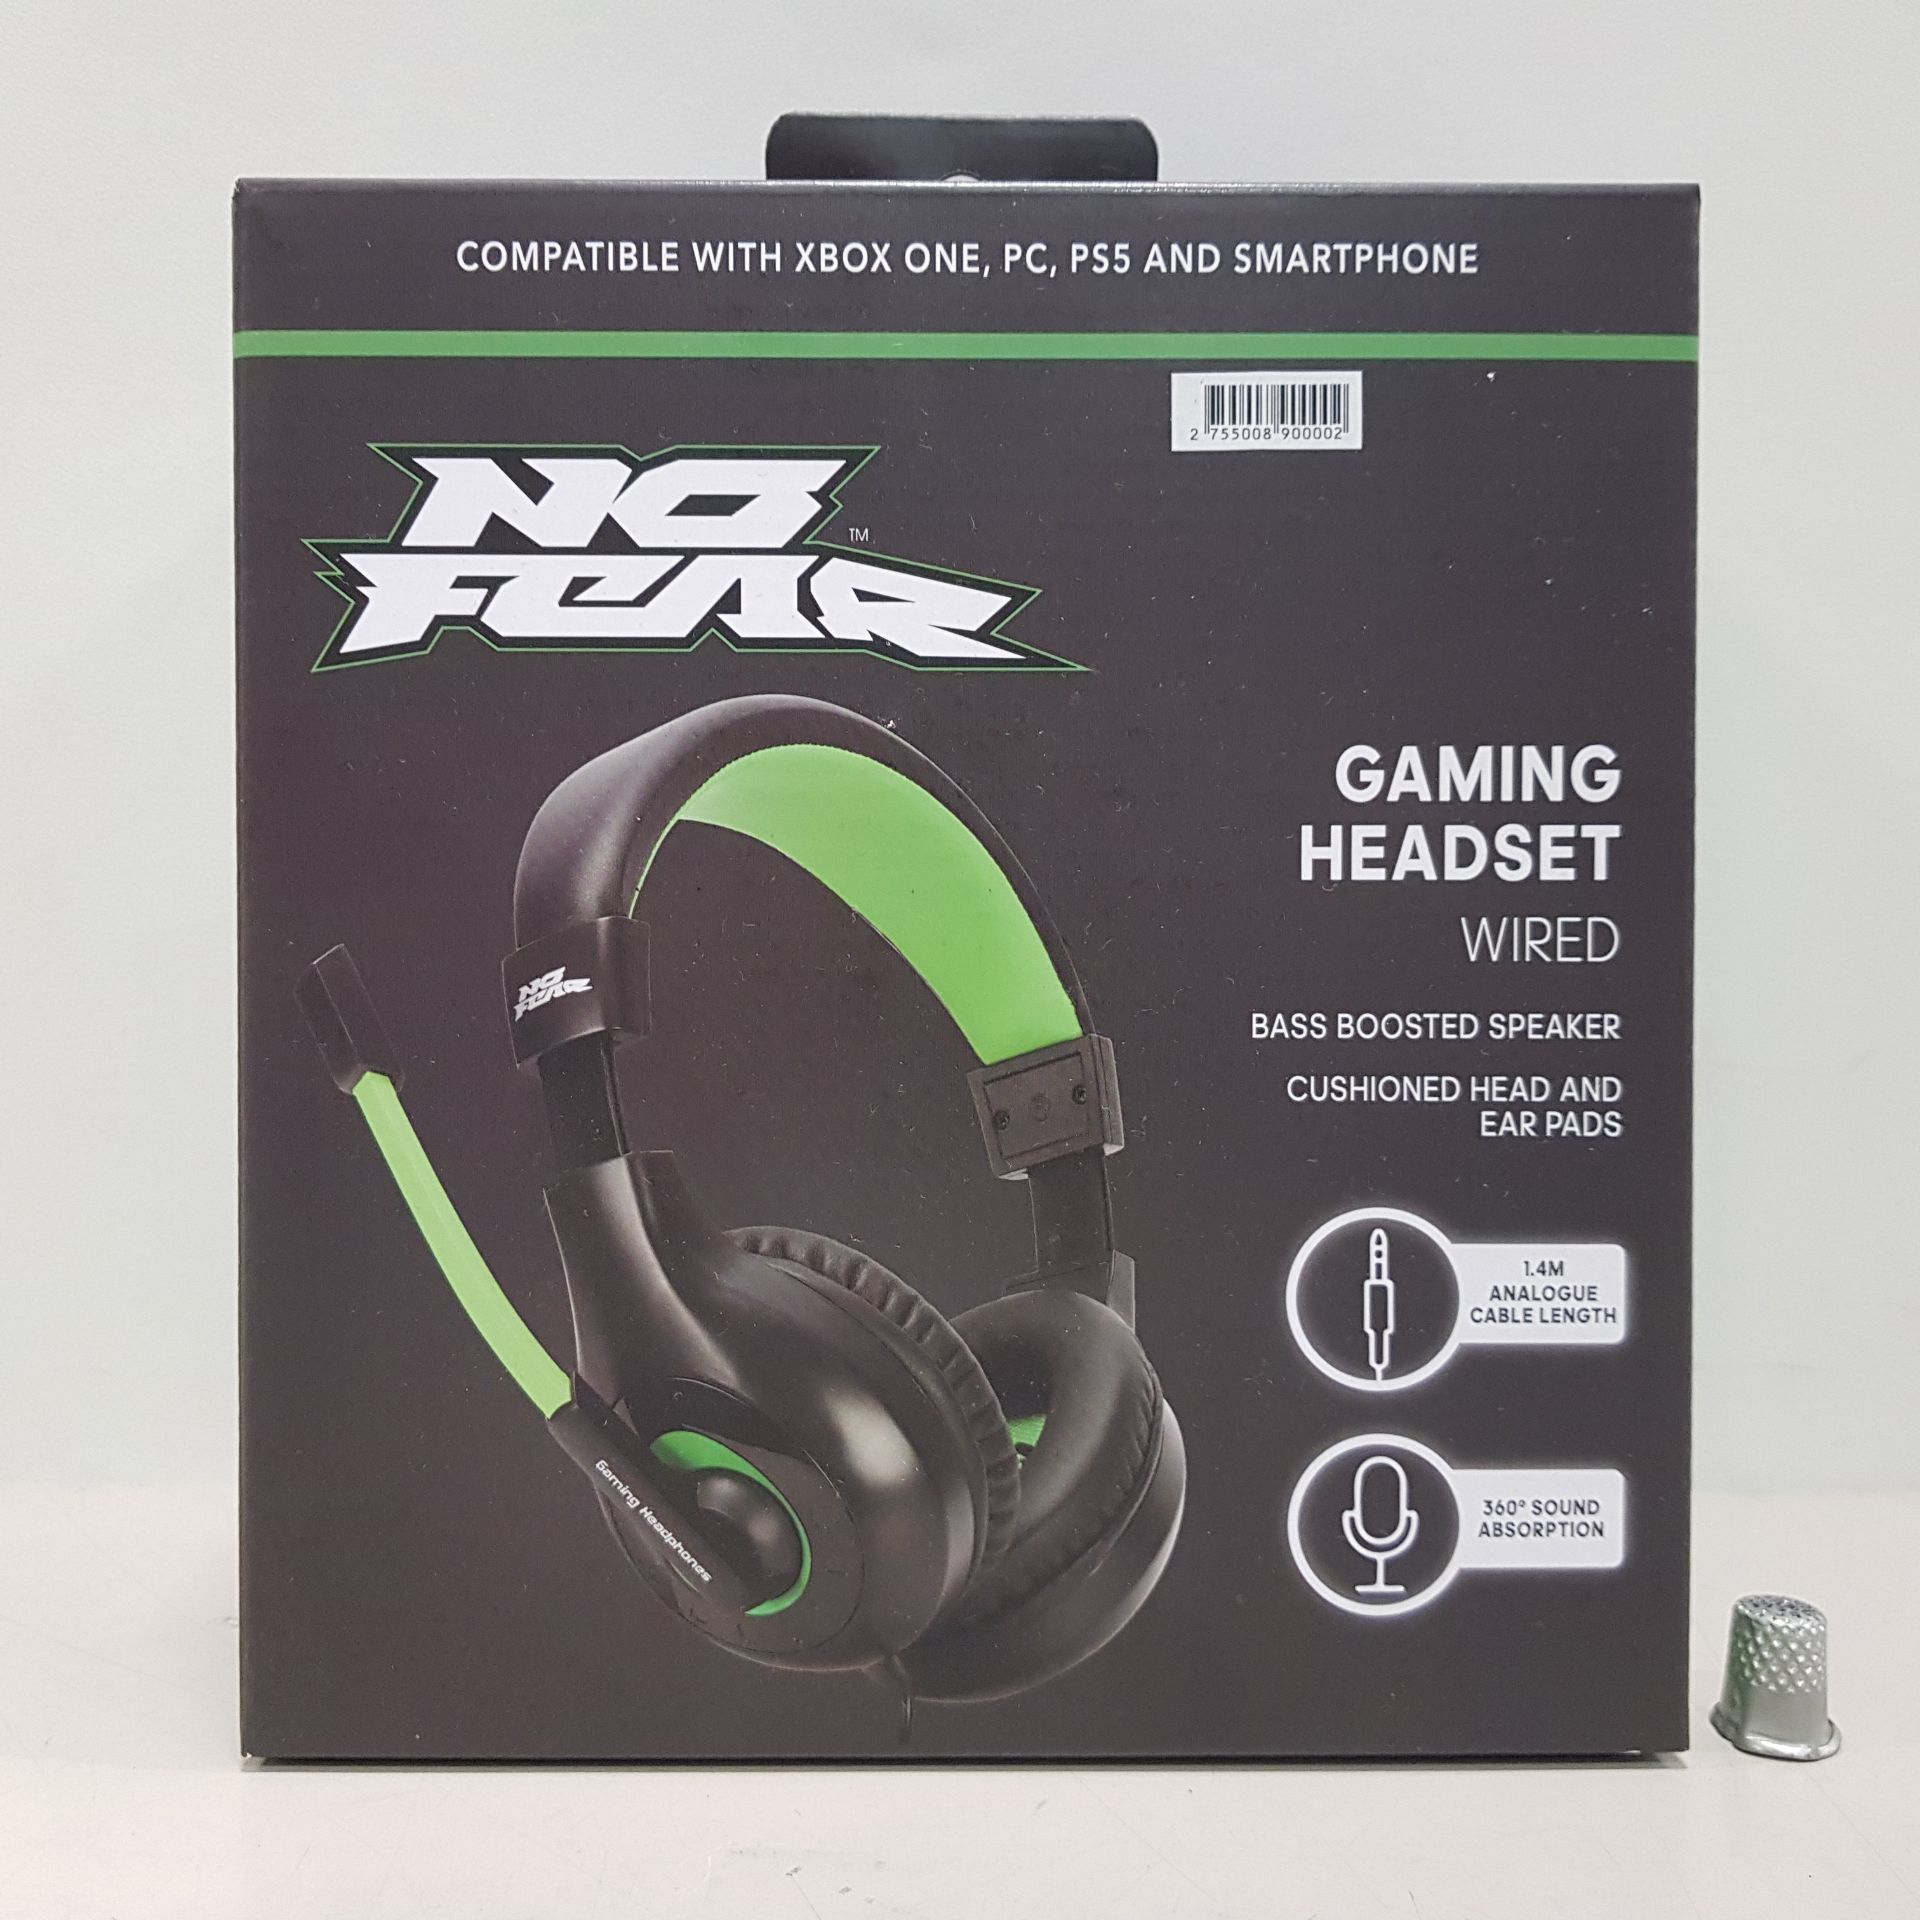 32 X BRAND NEW NO FEAR GAMING HEAD SETS BASS BOOSTED SPEAKERS FOR XBOX1, PC, PS4, PS5